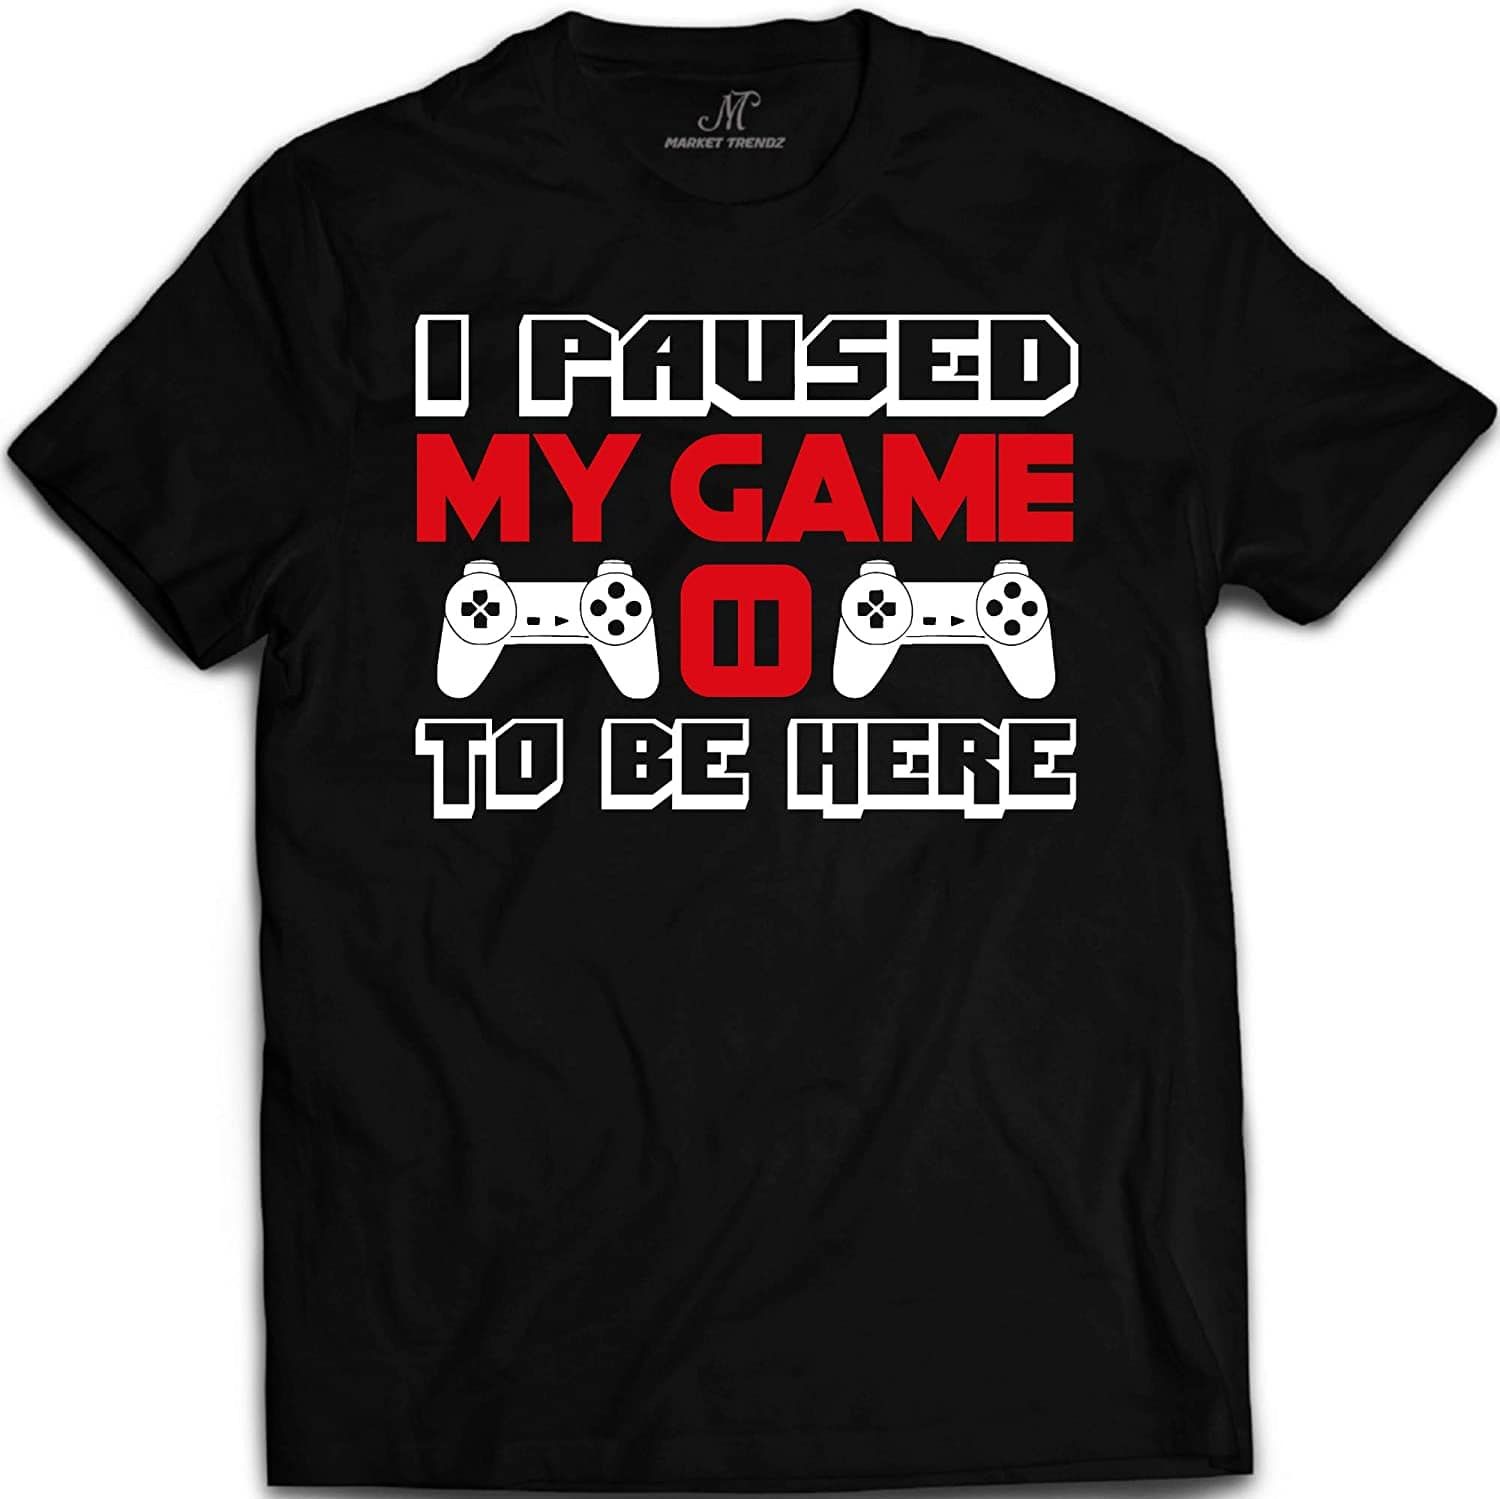 I Paused My Game To Be Here T Shirt Video Game Shirts For Men PAN2TS0254